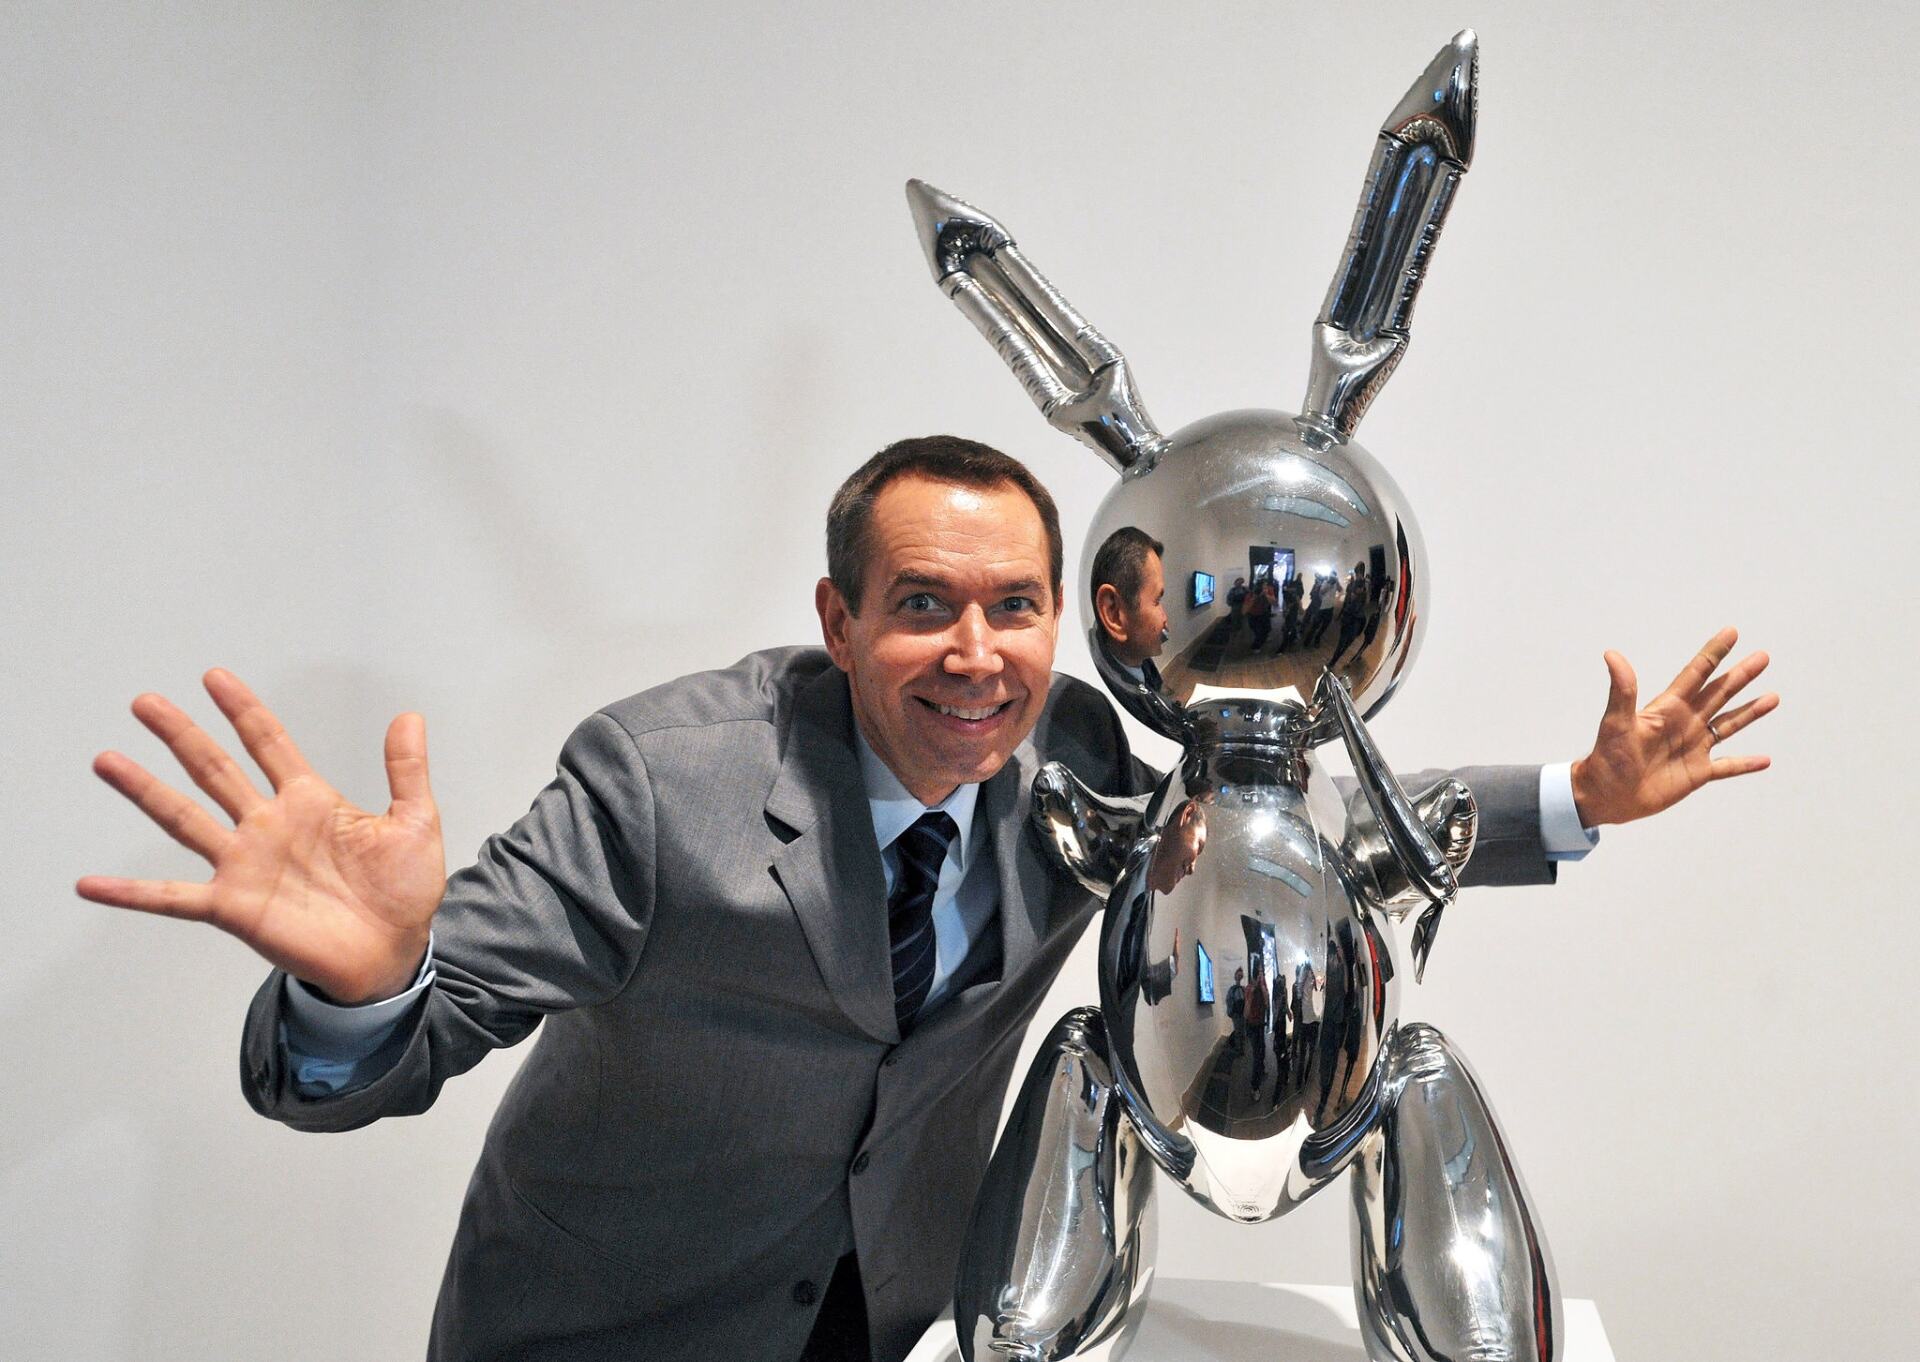 © New York Times Jeff Koons poses with “Rabbit” at the Tate Modern in 2009. Credit...Daniel Deme/EPA, via Shutterstock